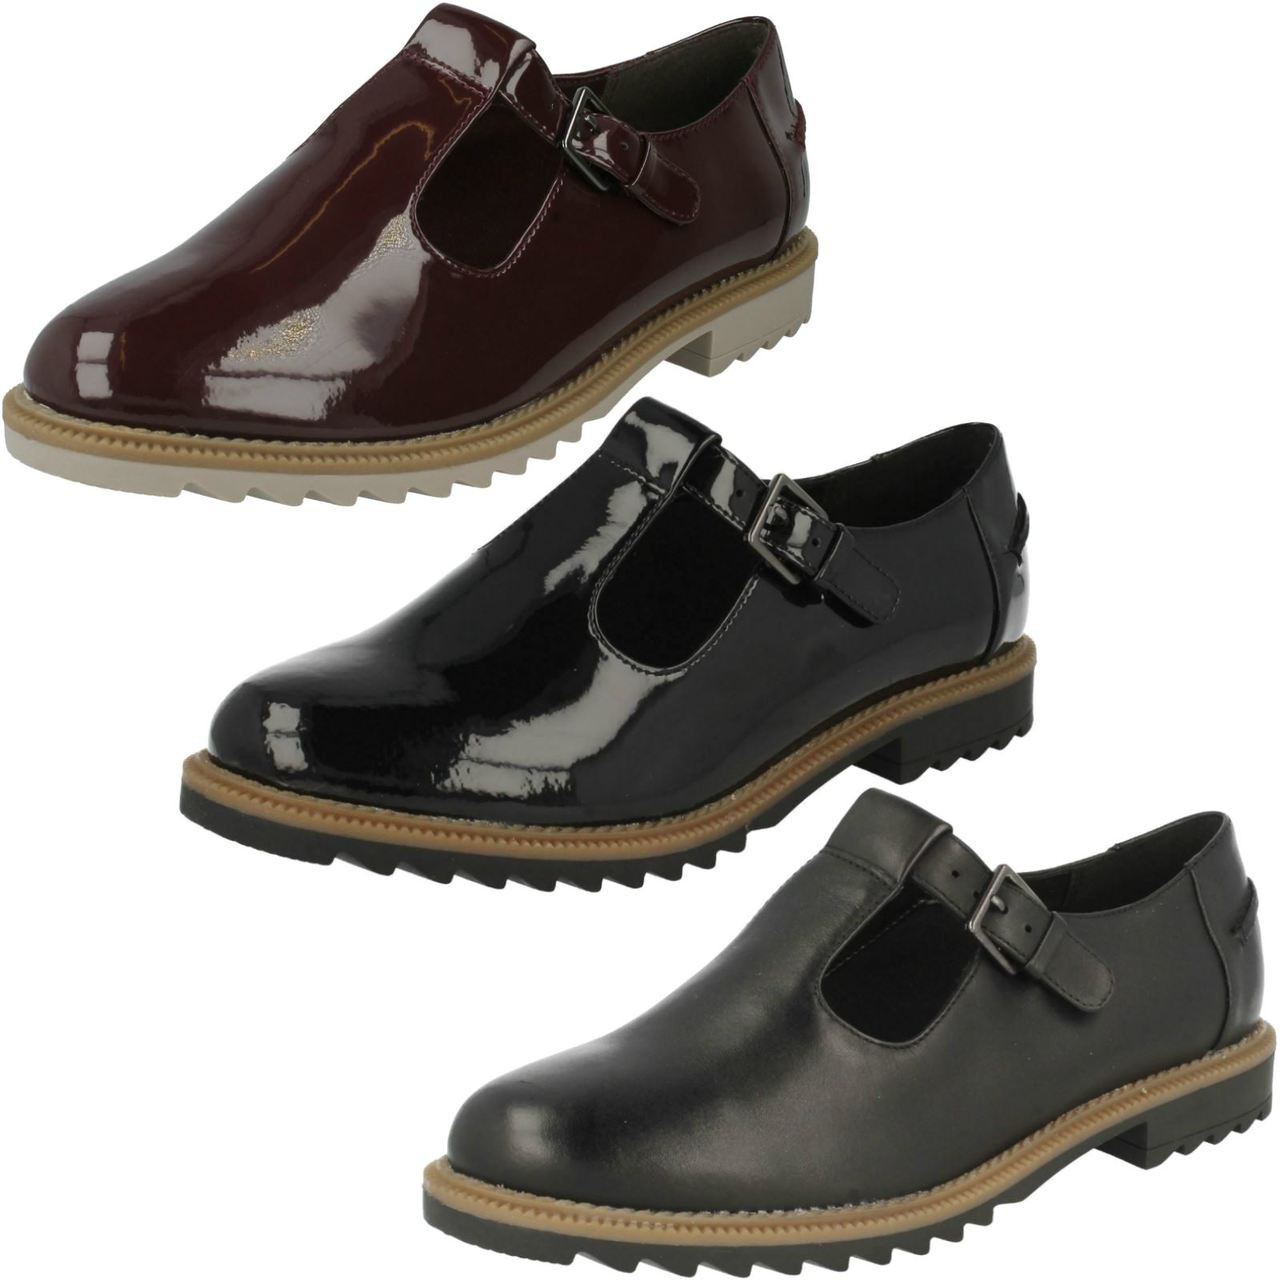 clarks griffin monty patent leather shoes